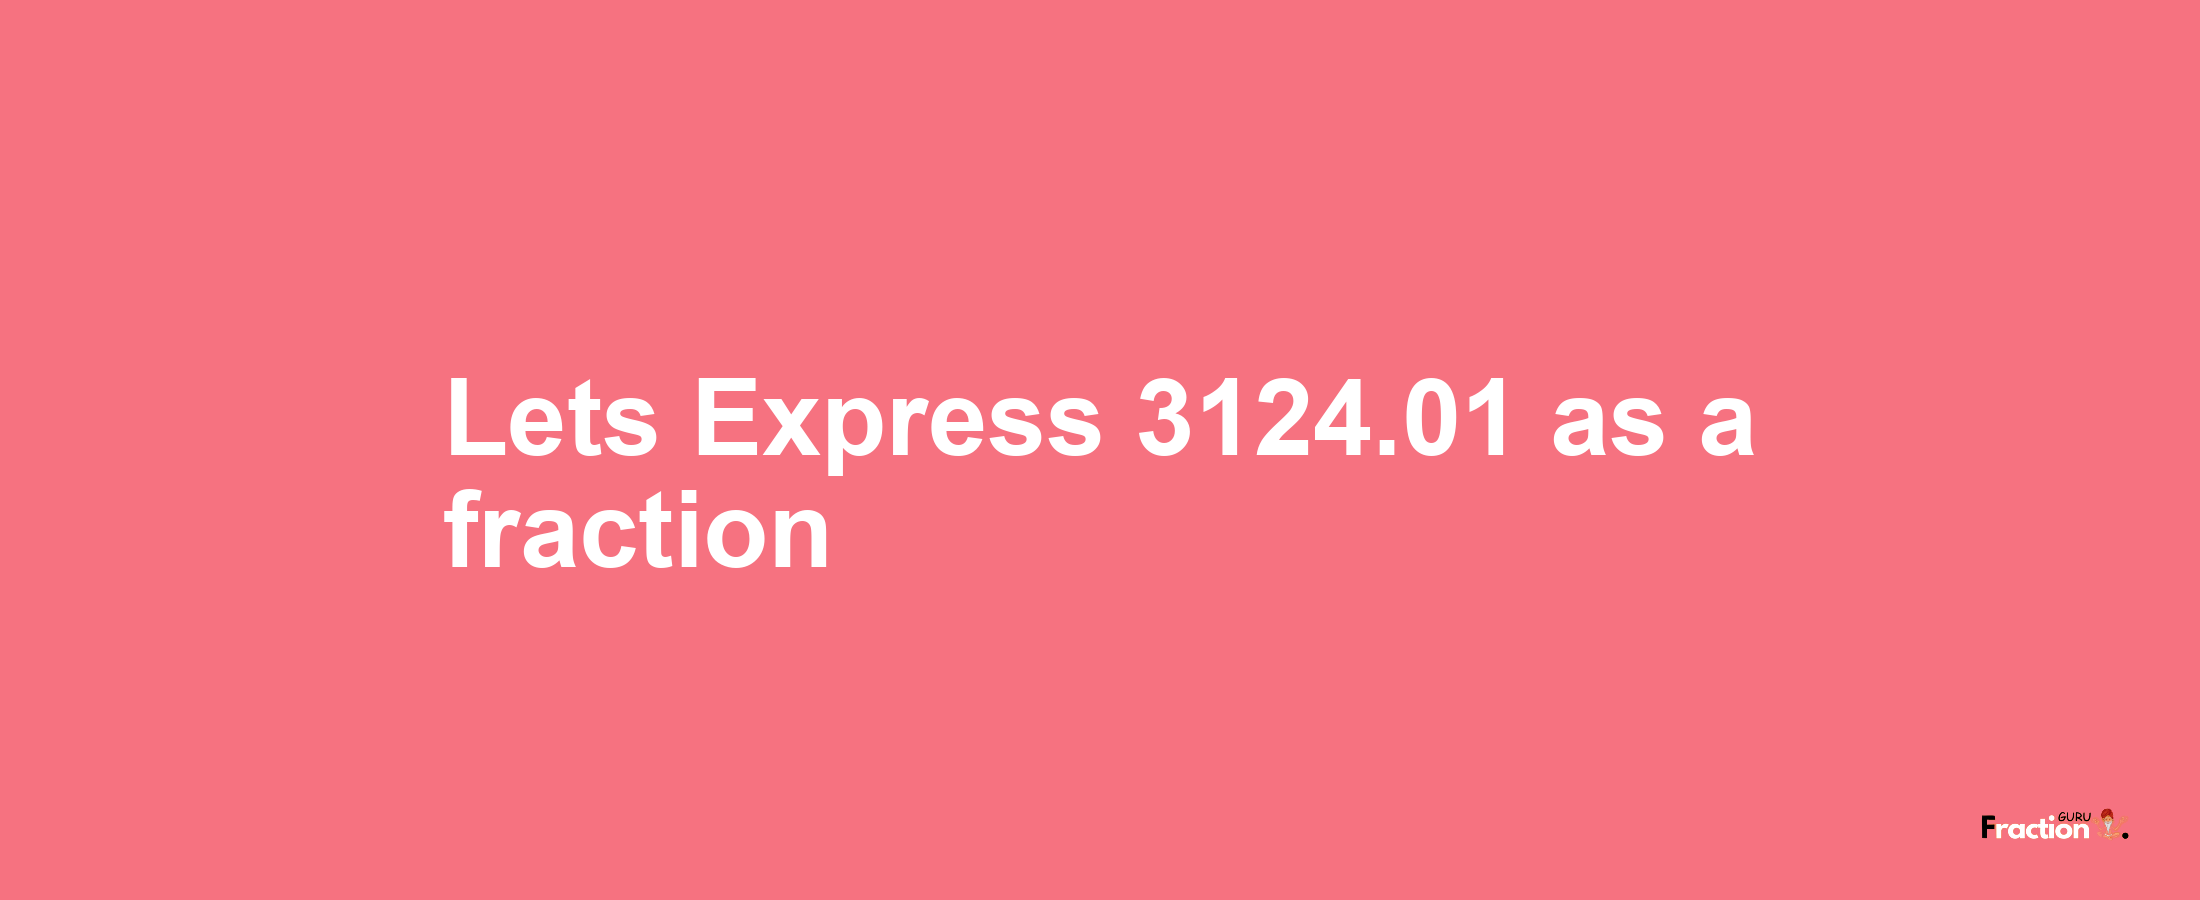 Lets Express 3124.01 as afraction